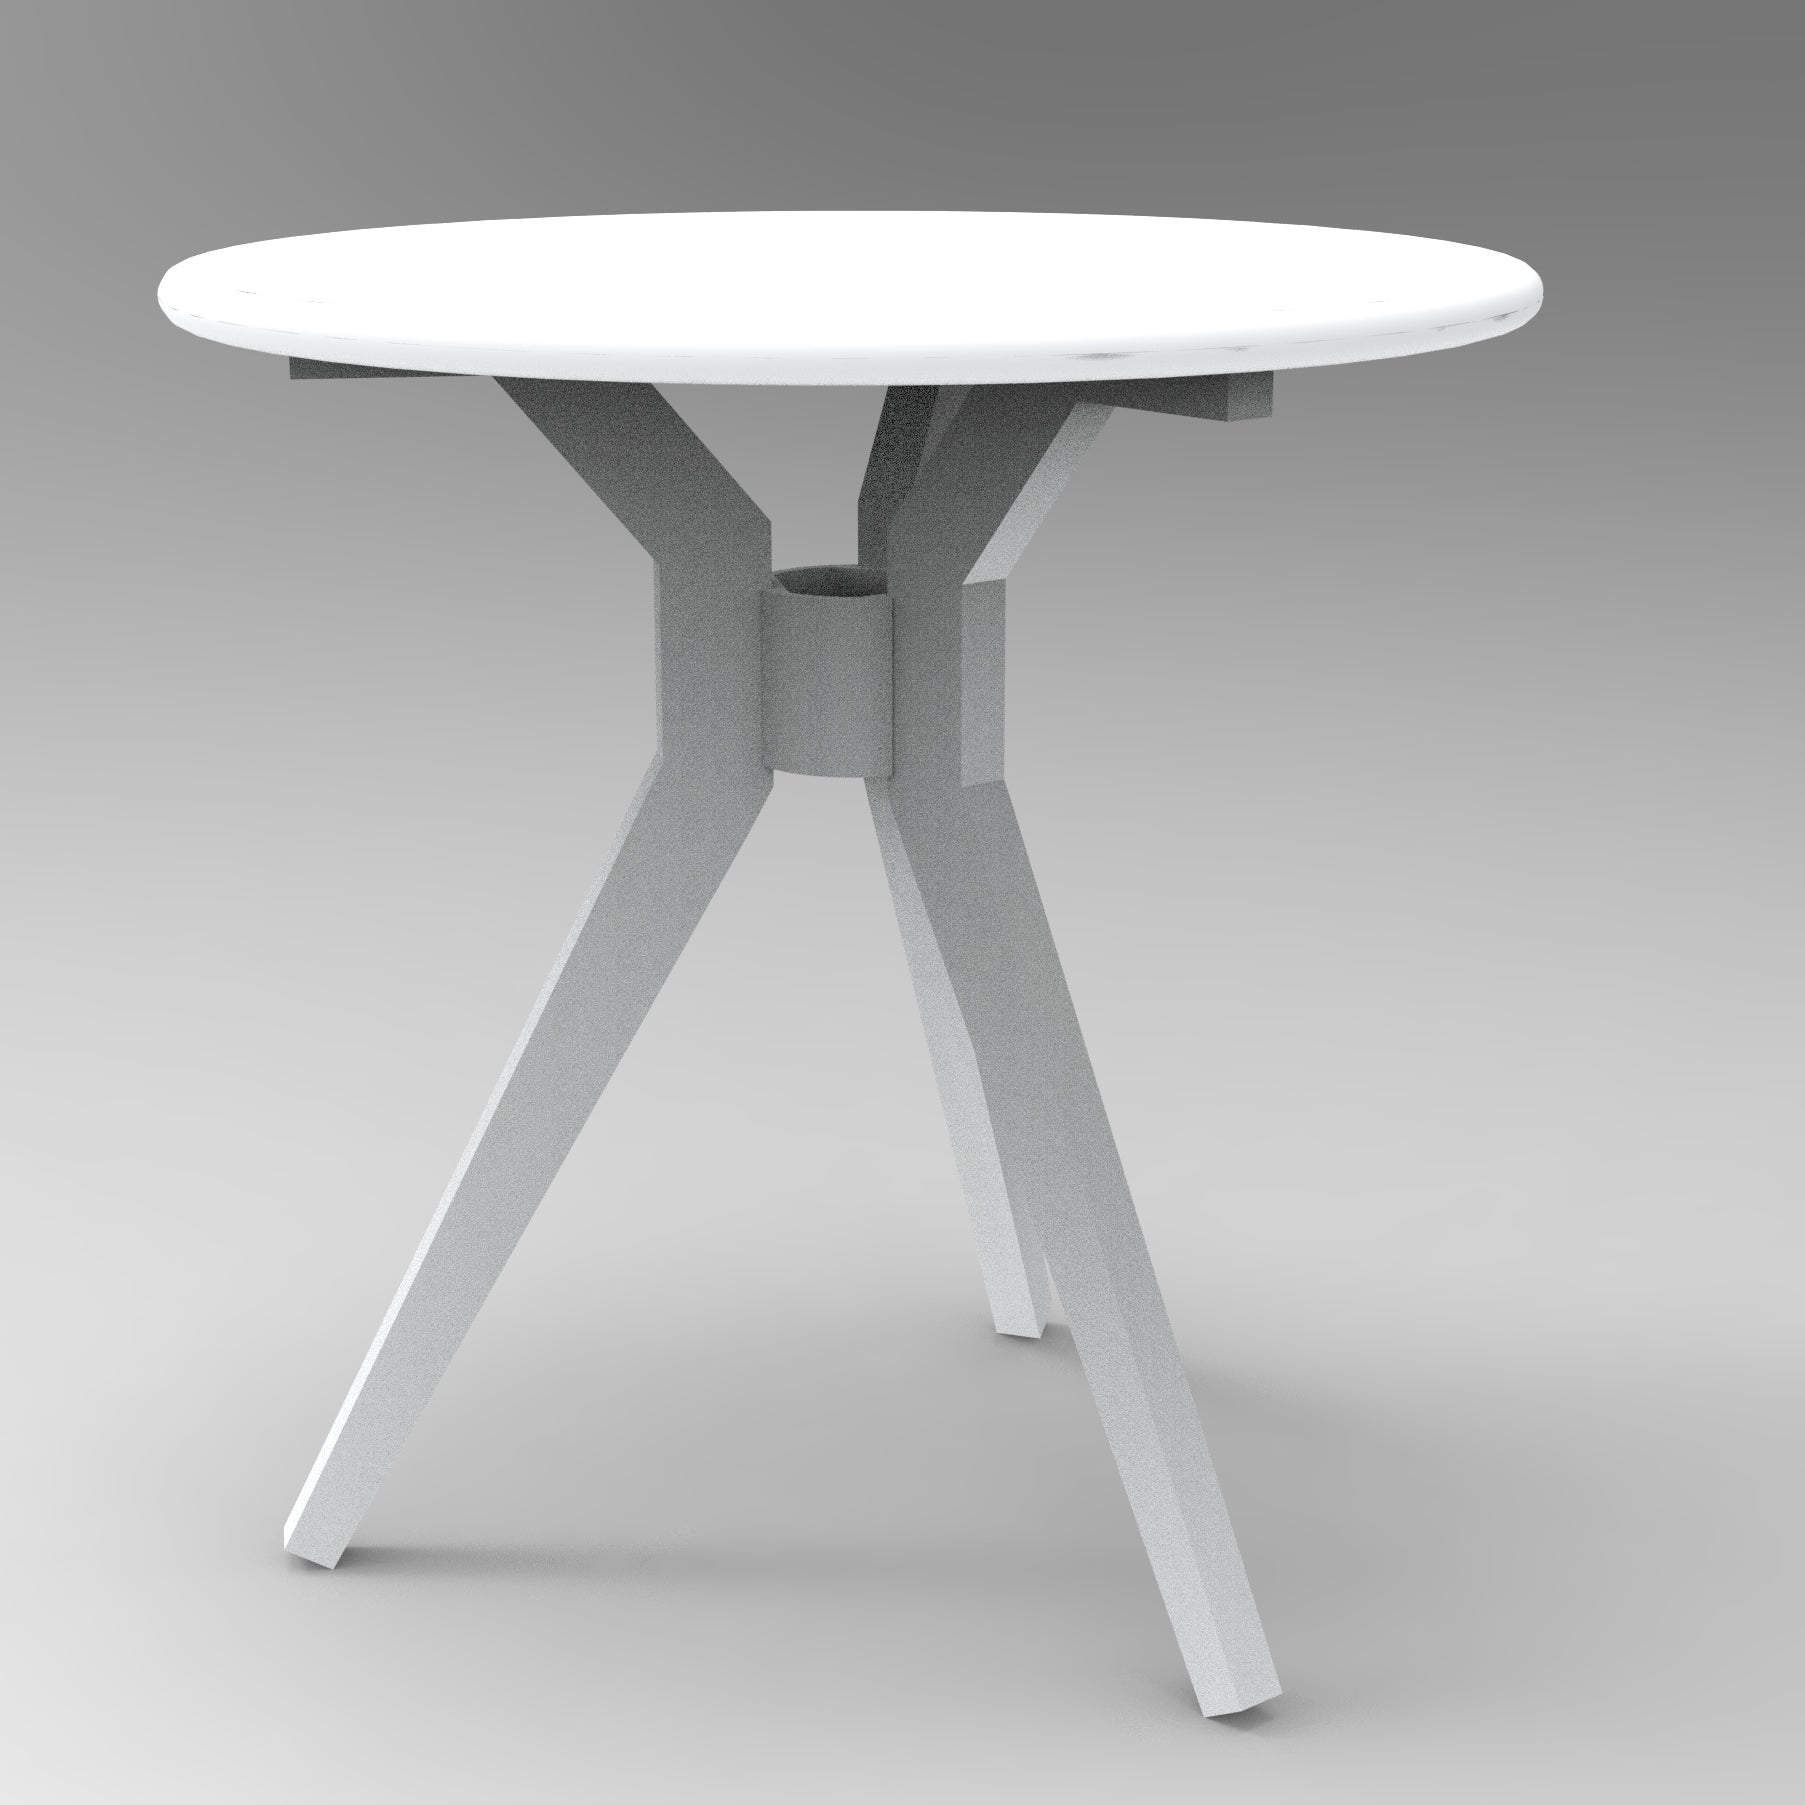 All aluminum round dining table